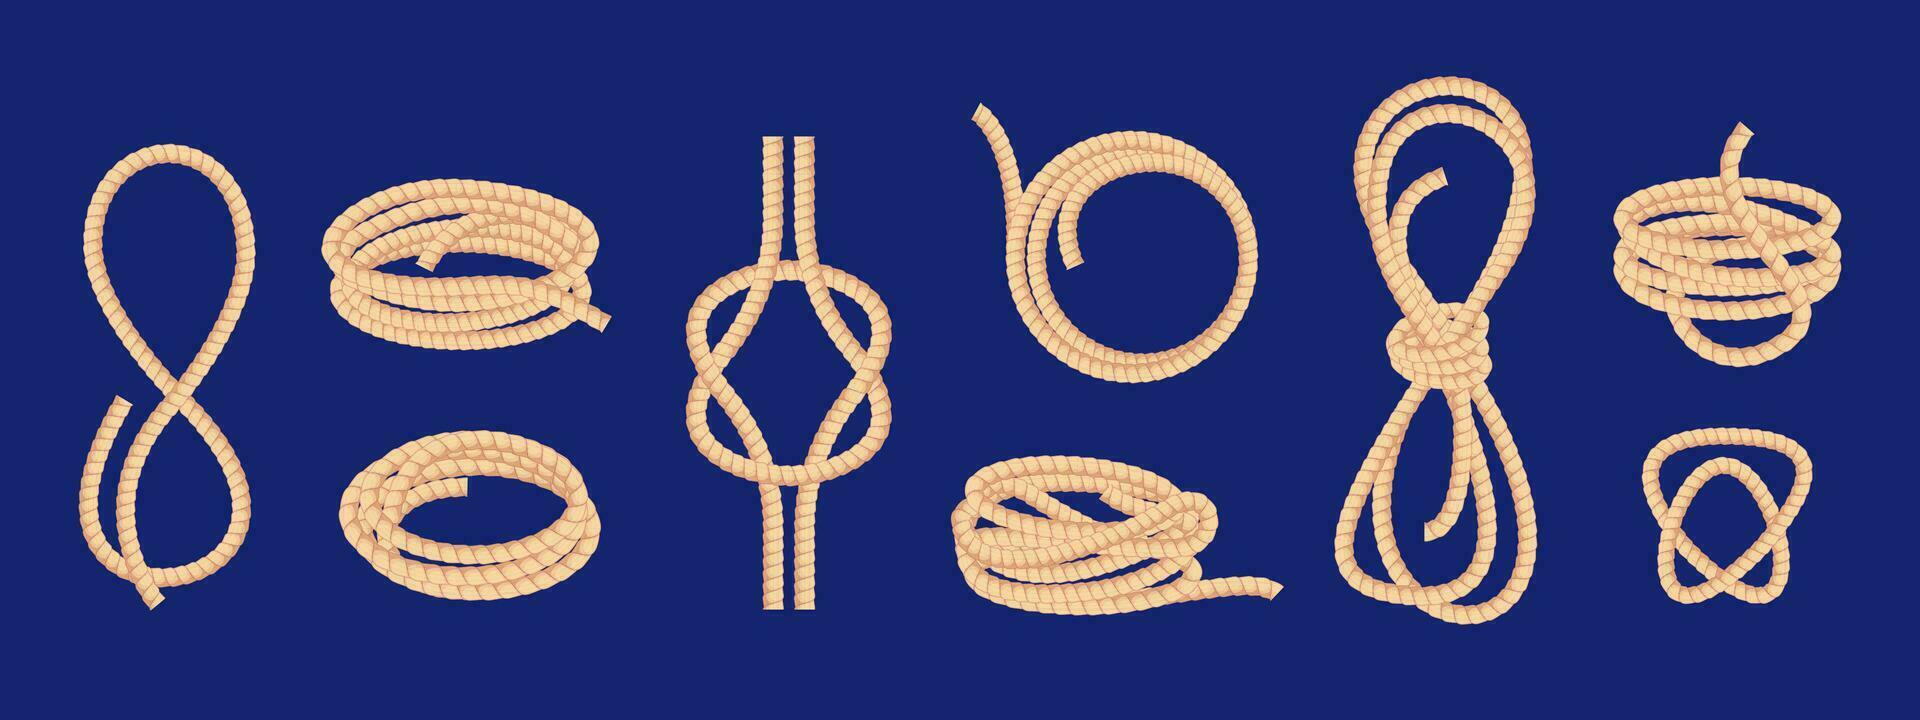 https://static.vecteezy.com/system/resources/previews/025/515/438/non_2x/folded-ropes-sketch-trimming-icons-for-catching-cattle-twisted-braided-string-thread-knotted-ship-lasso-folded-in-different-ways-isolated-set-vector.jpg